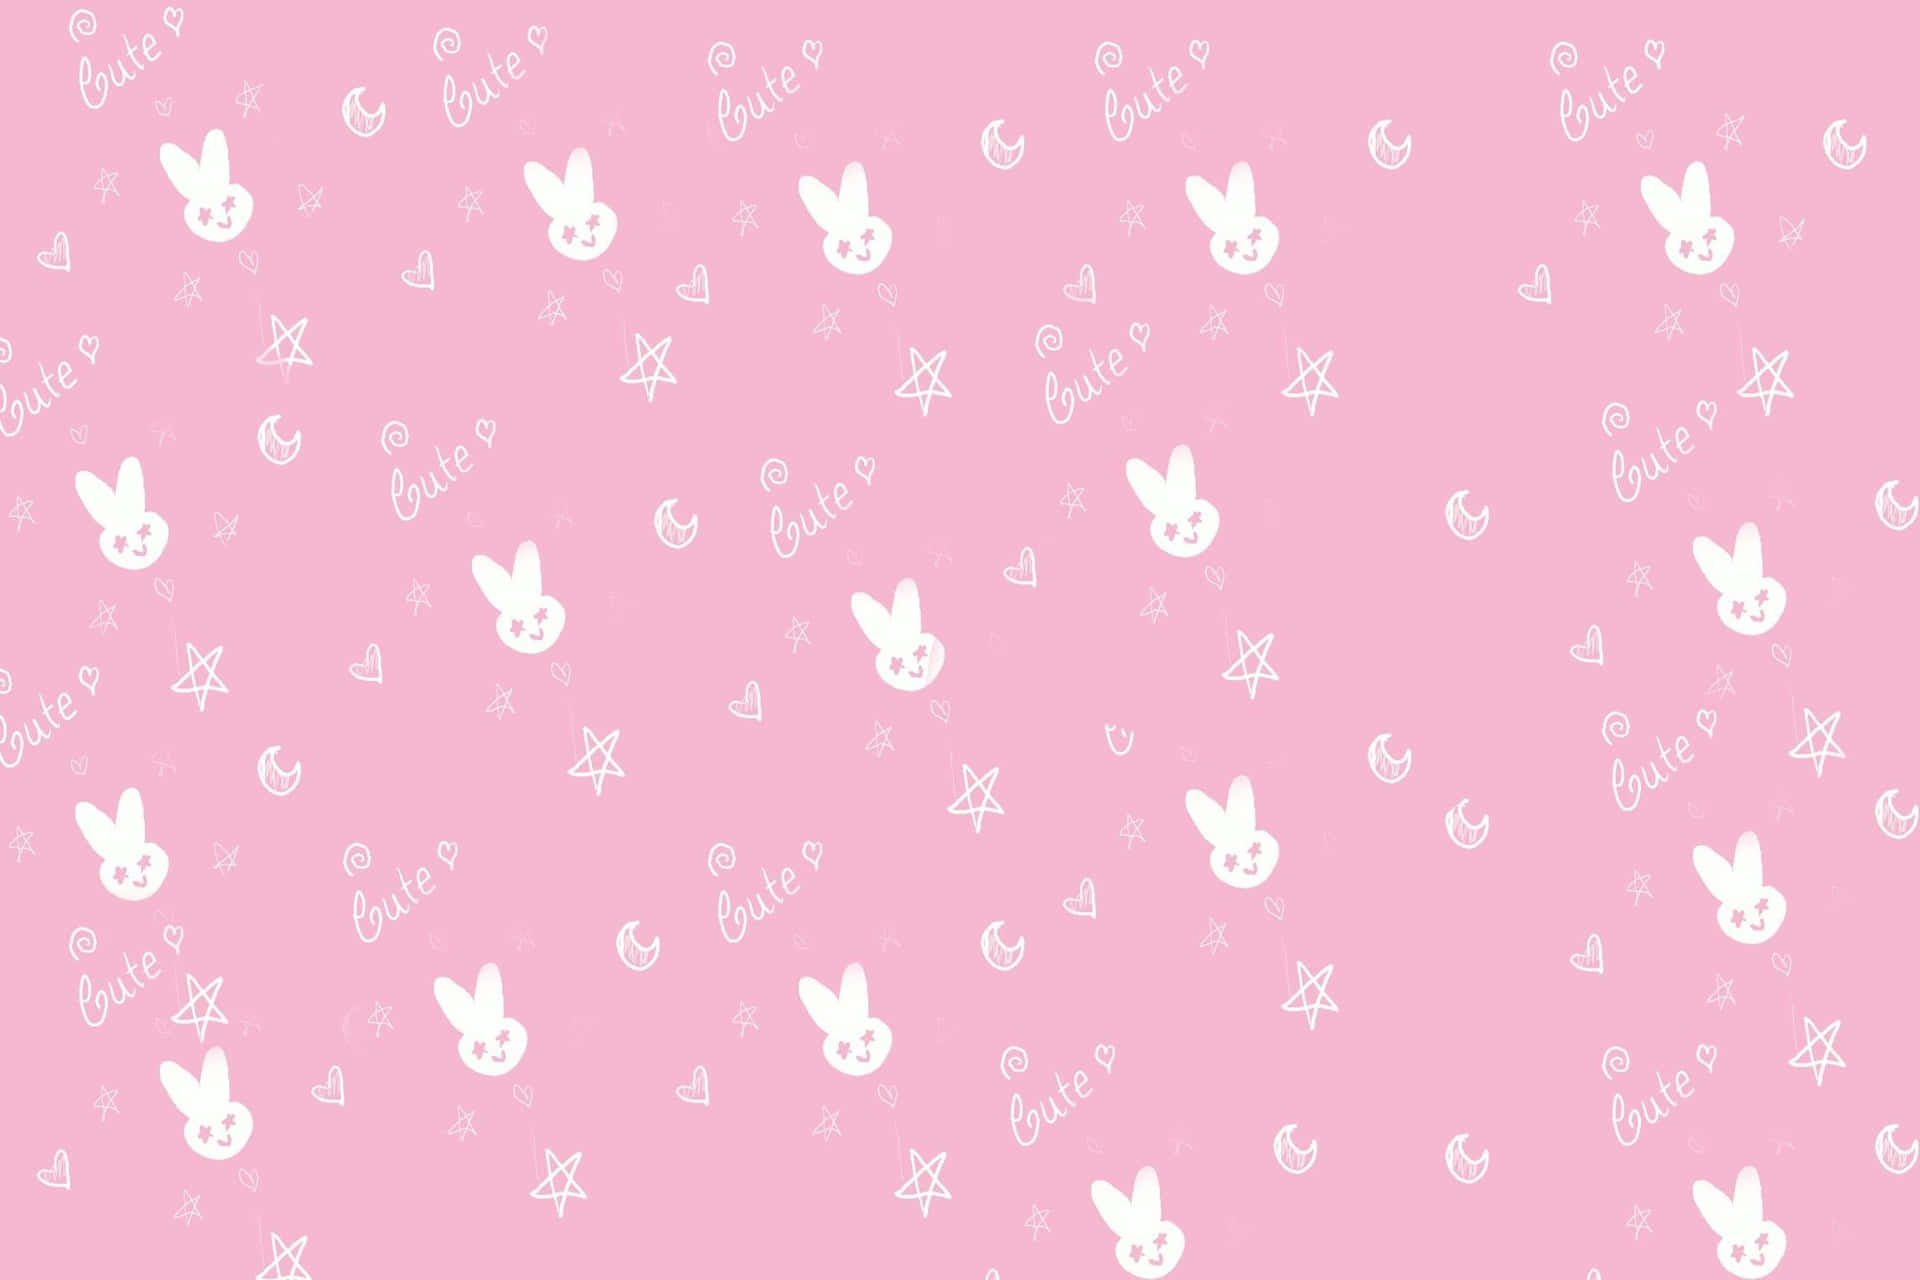 A Pink Background With White Bunnies On It Wallpaper